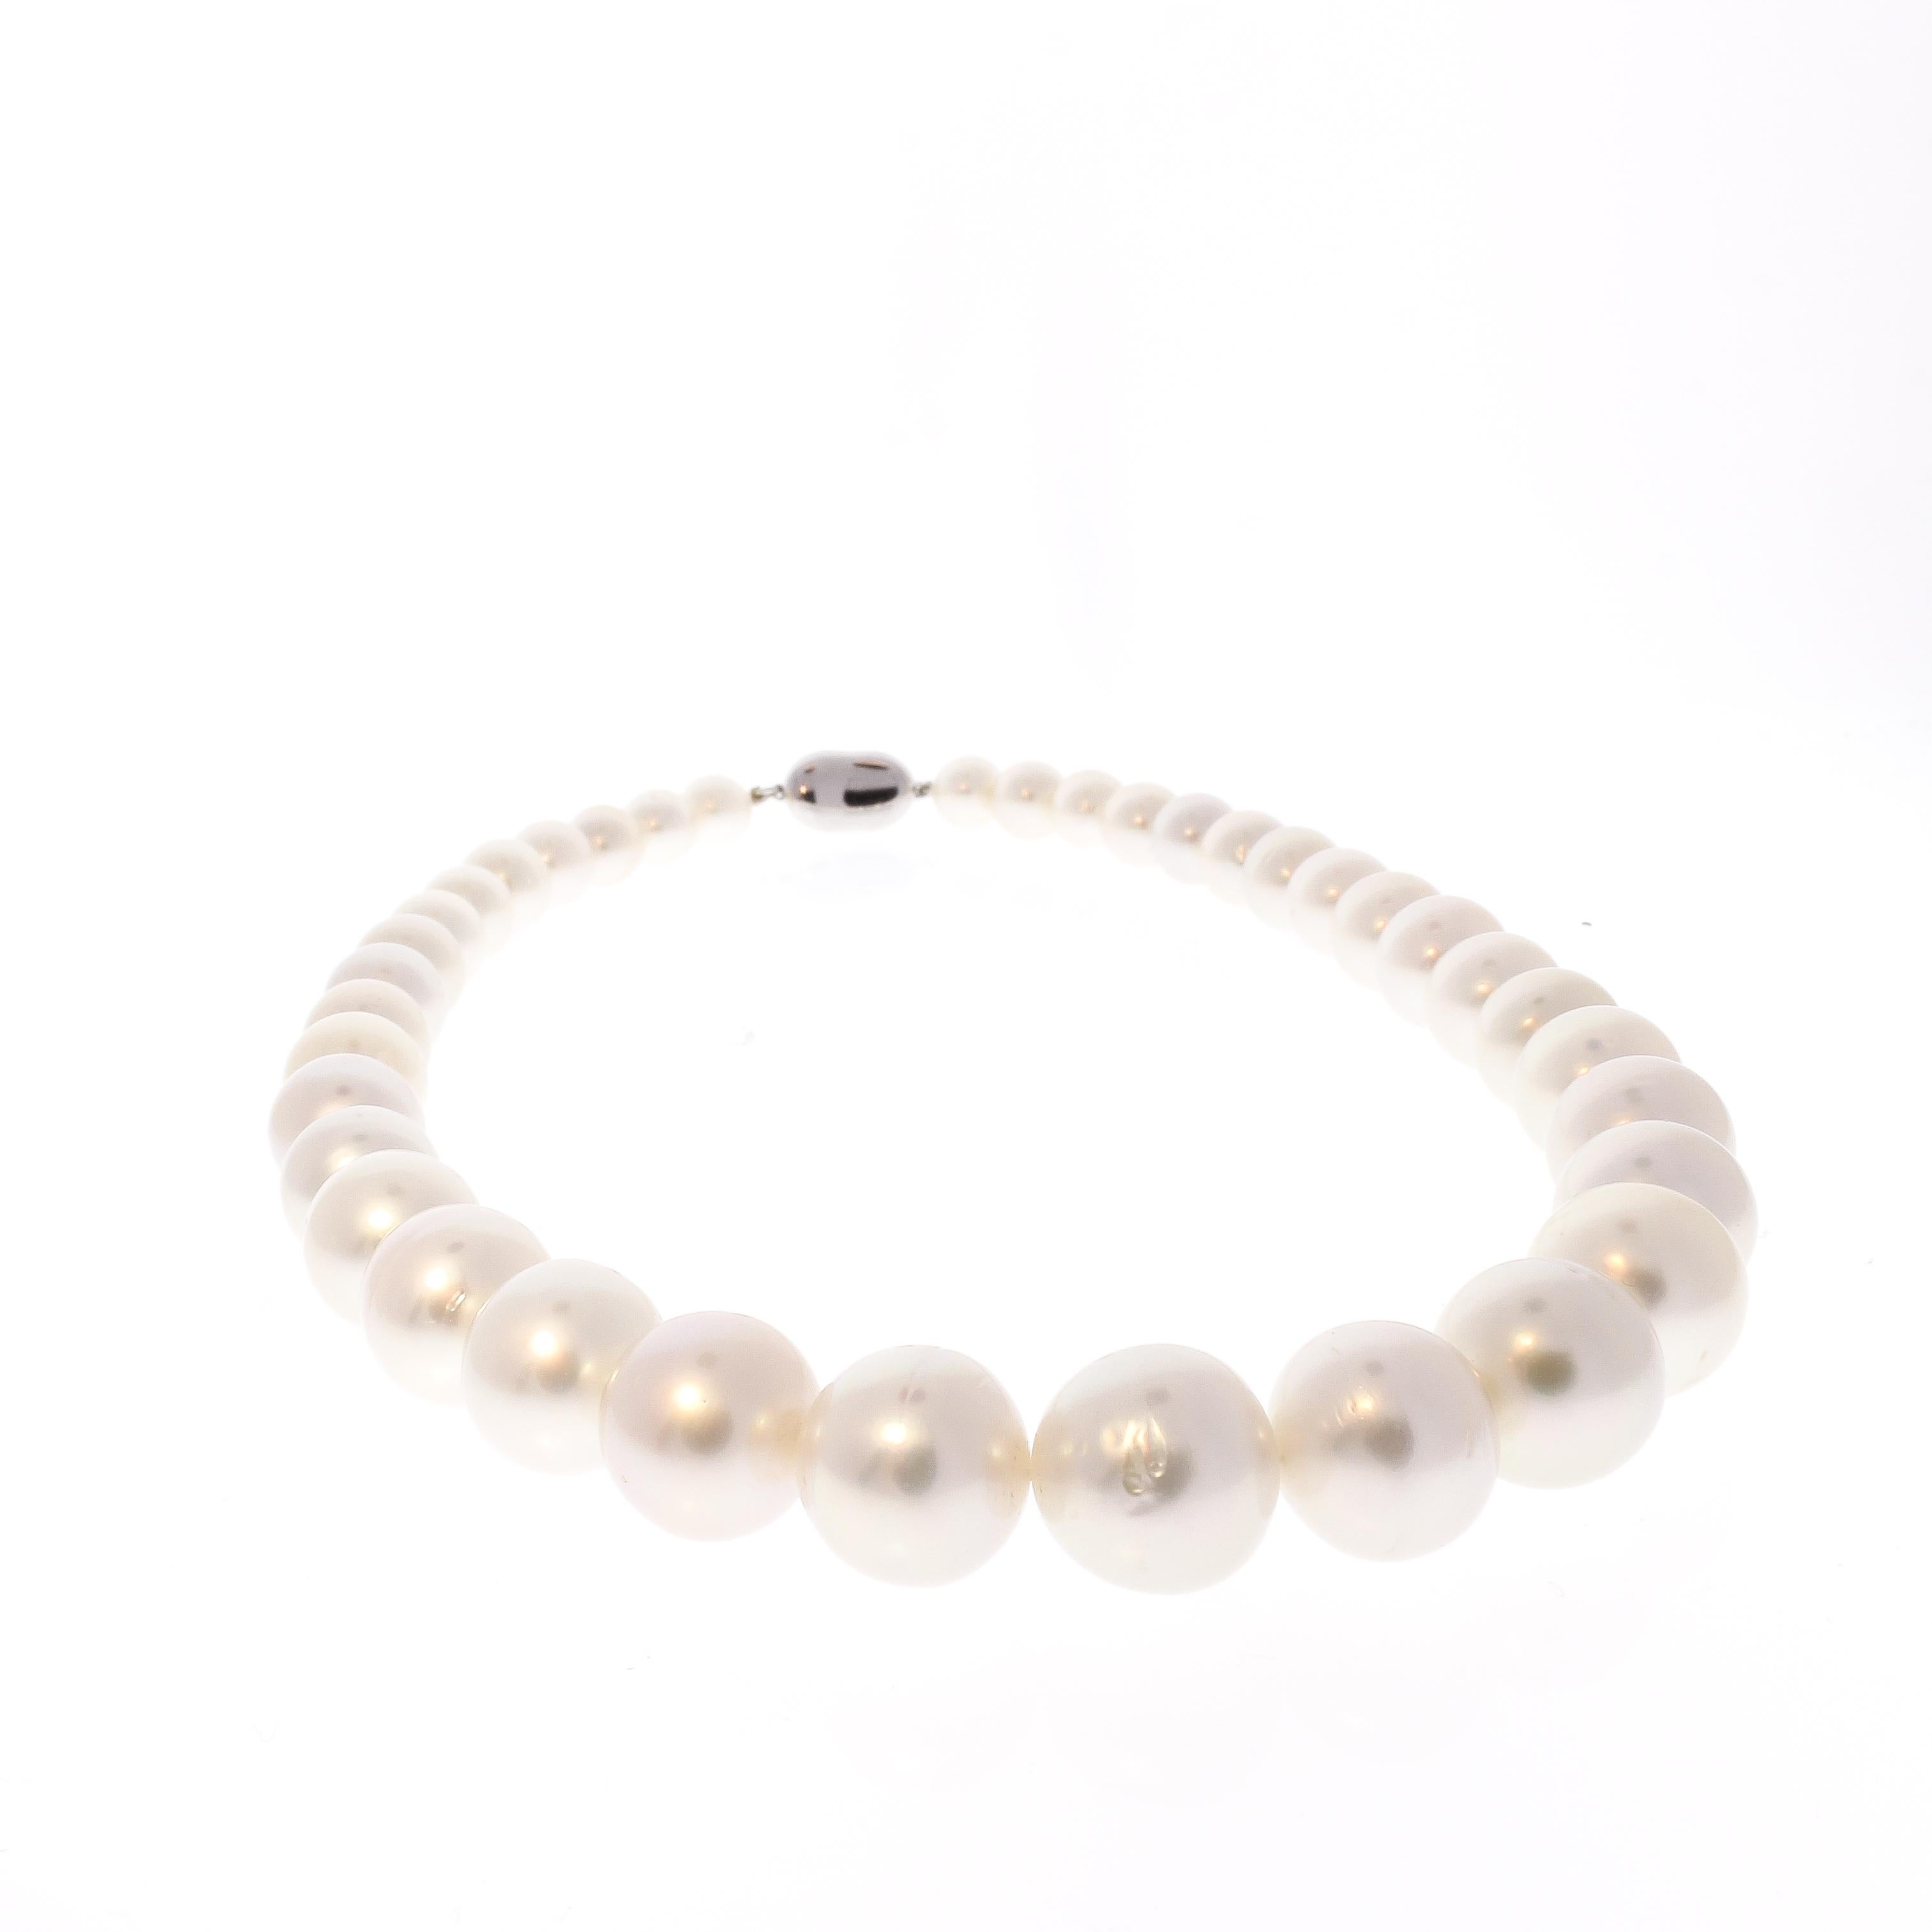 This exquisite pearl necklace features graduated South Sea white pearls that go from 8-13 millimeter.  The pearls have been selected for color matching and luster matching. The color of these pearls is ivory white. The timeless elegance of a fine